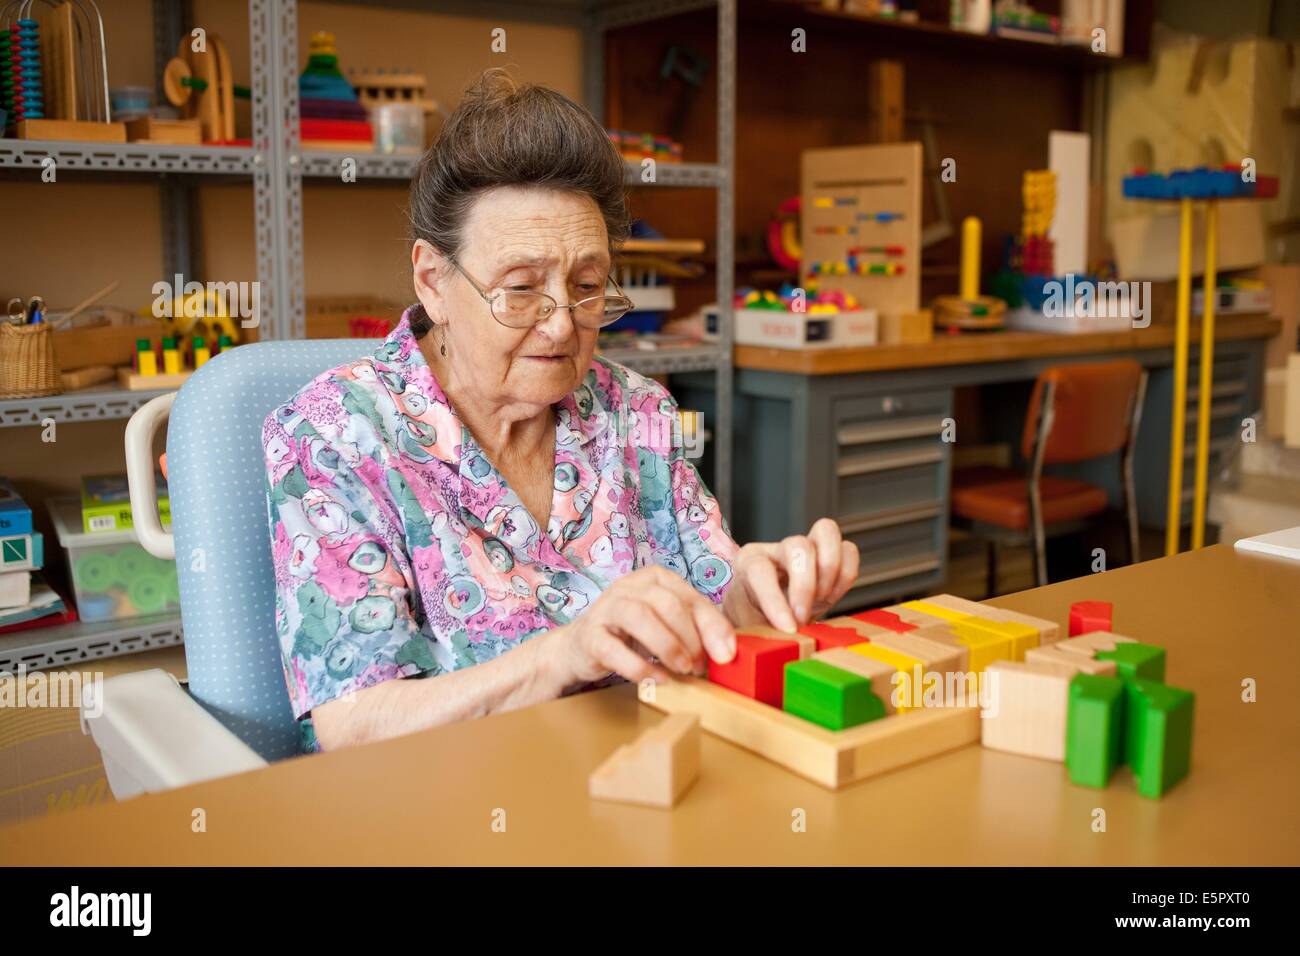 Ergotherapy workshop with games to stimulate memory; Residential home for dependent elderly person, Limoges, France. Stock Photo